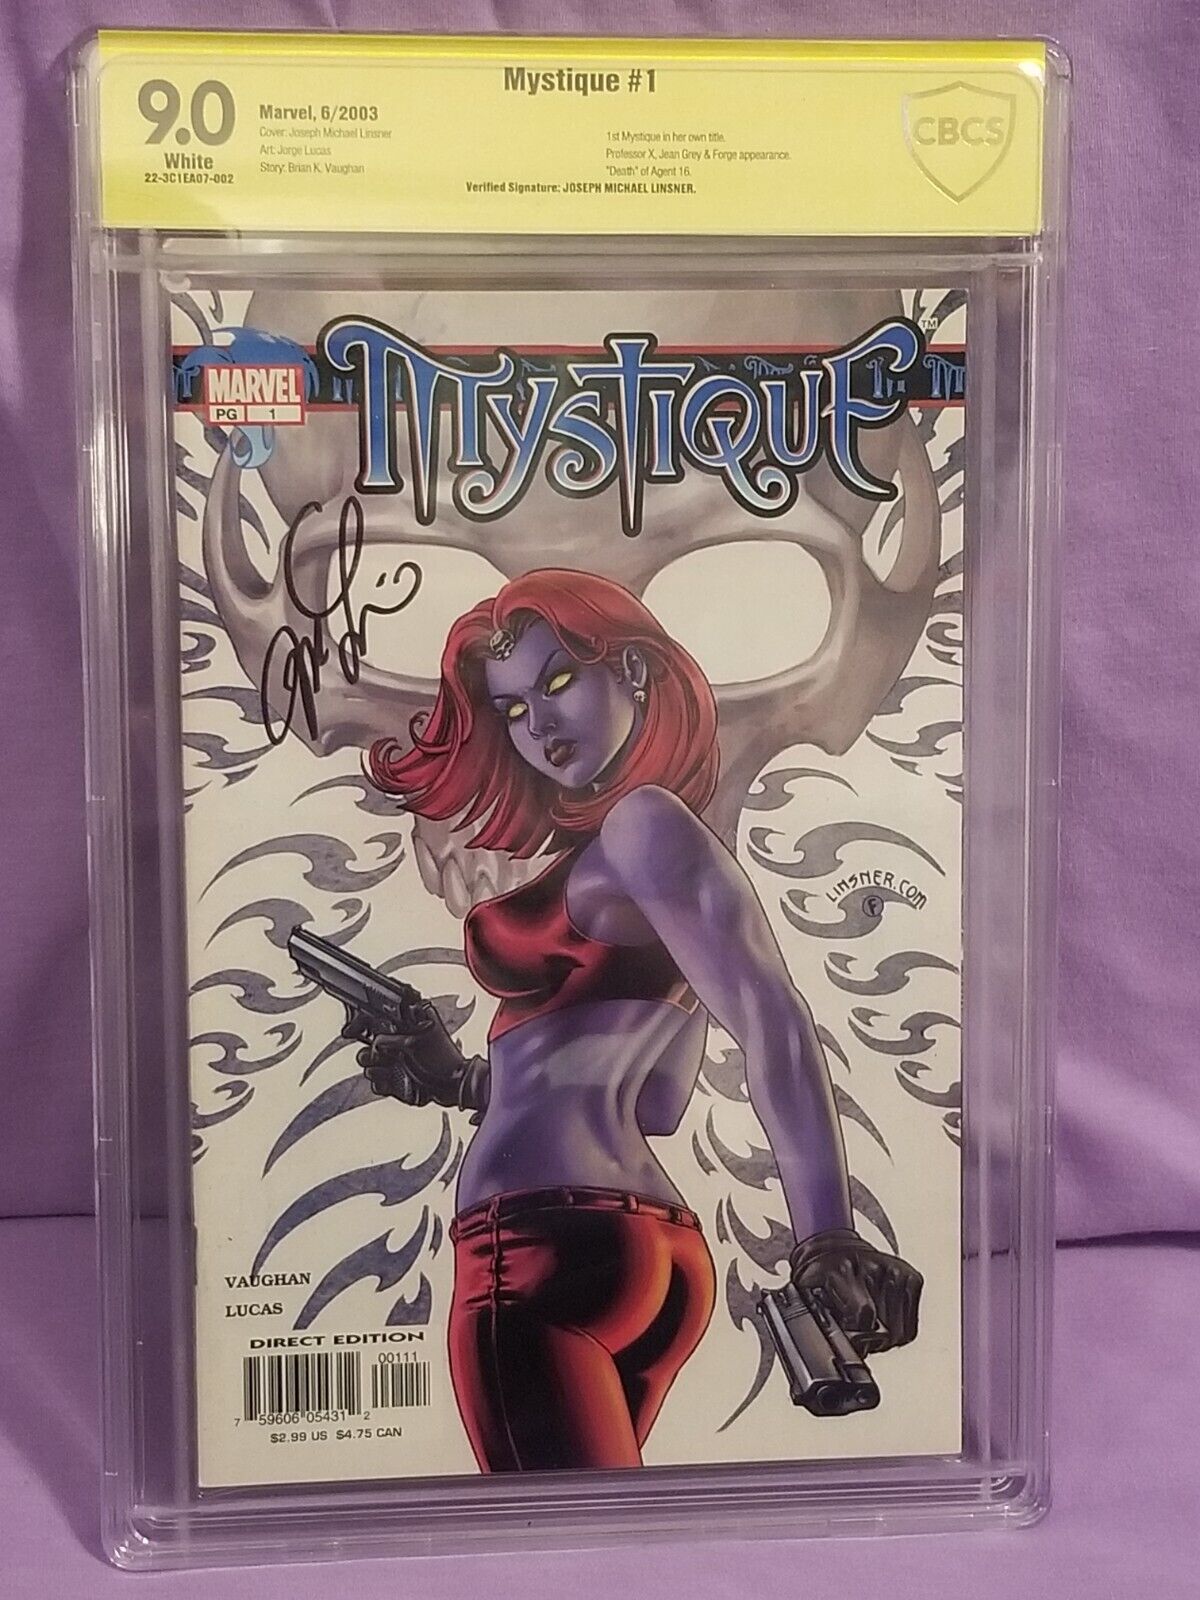 Mystique #1 SIGNED by Joseph Linsner graded 9.0 CBCS Verified - Dawn - not CGC